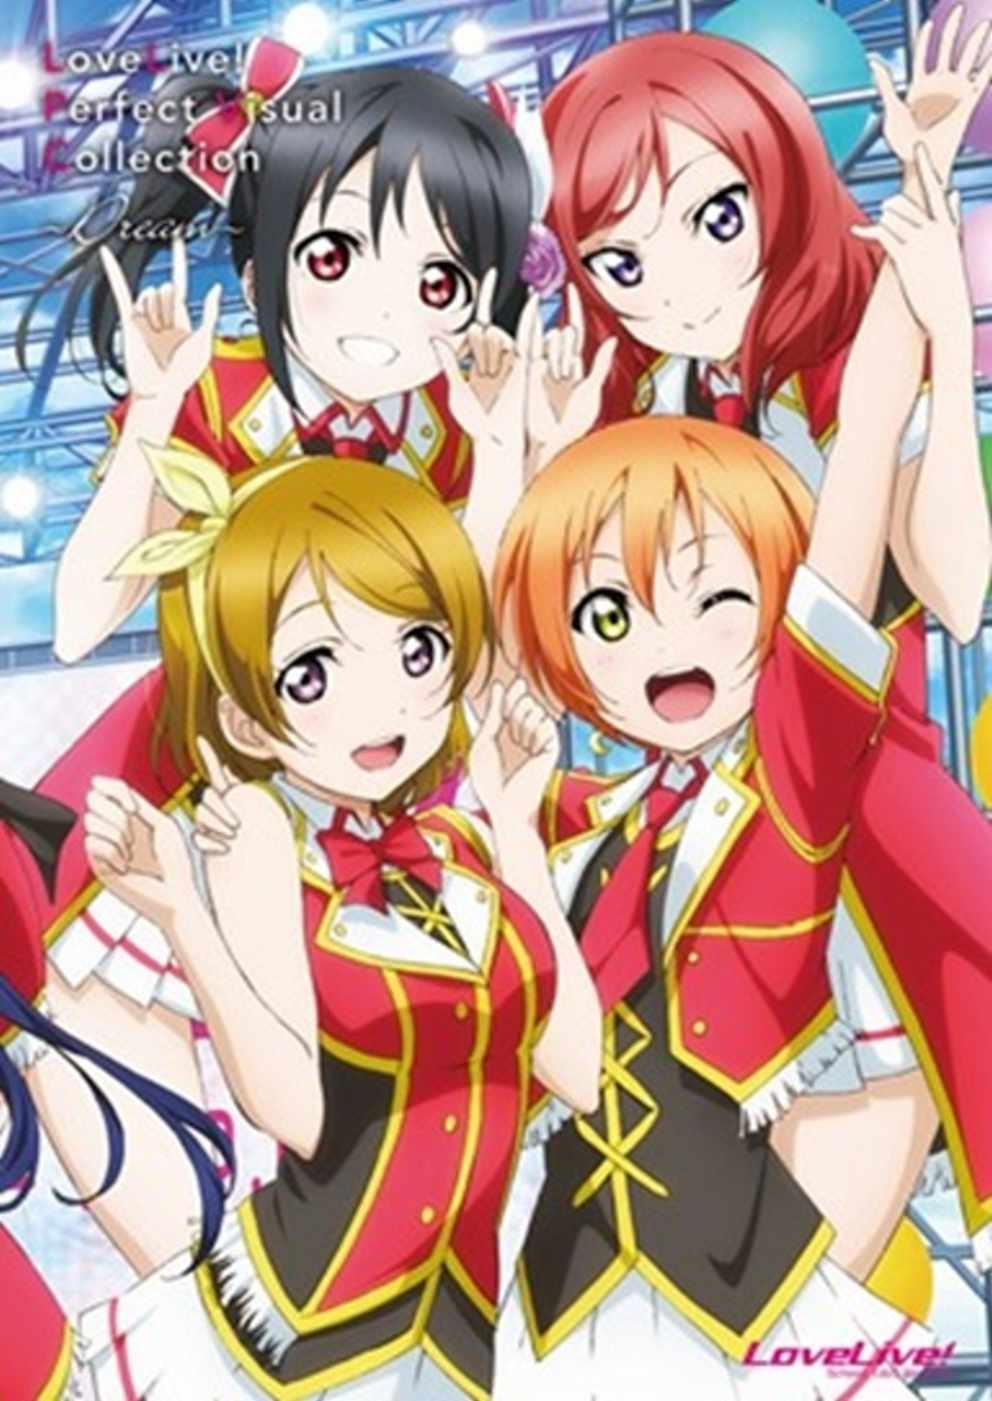 LoveLive! Perfect Visual Colle...